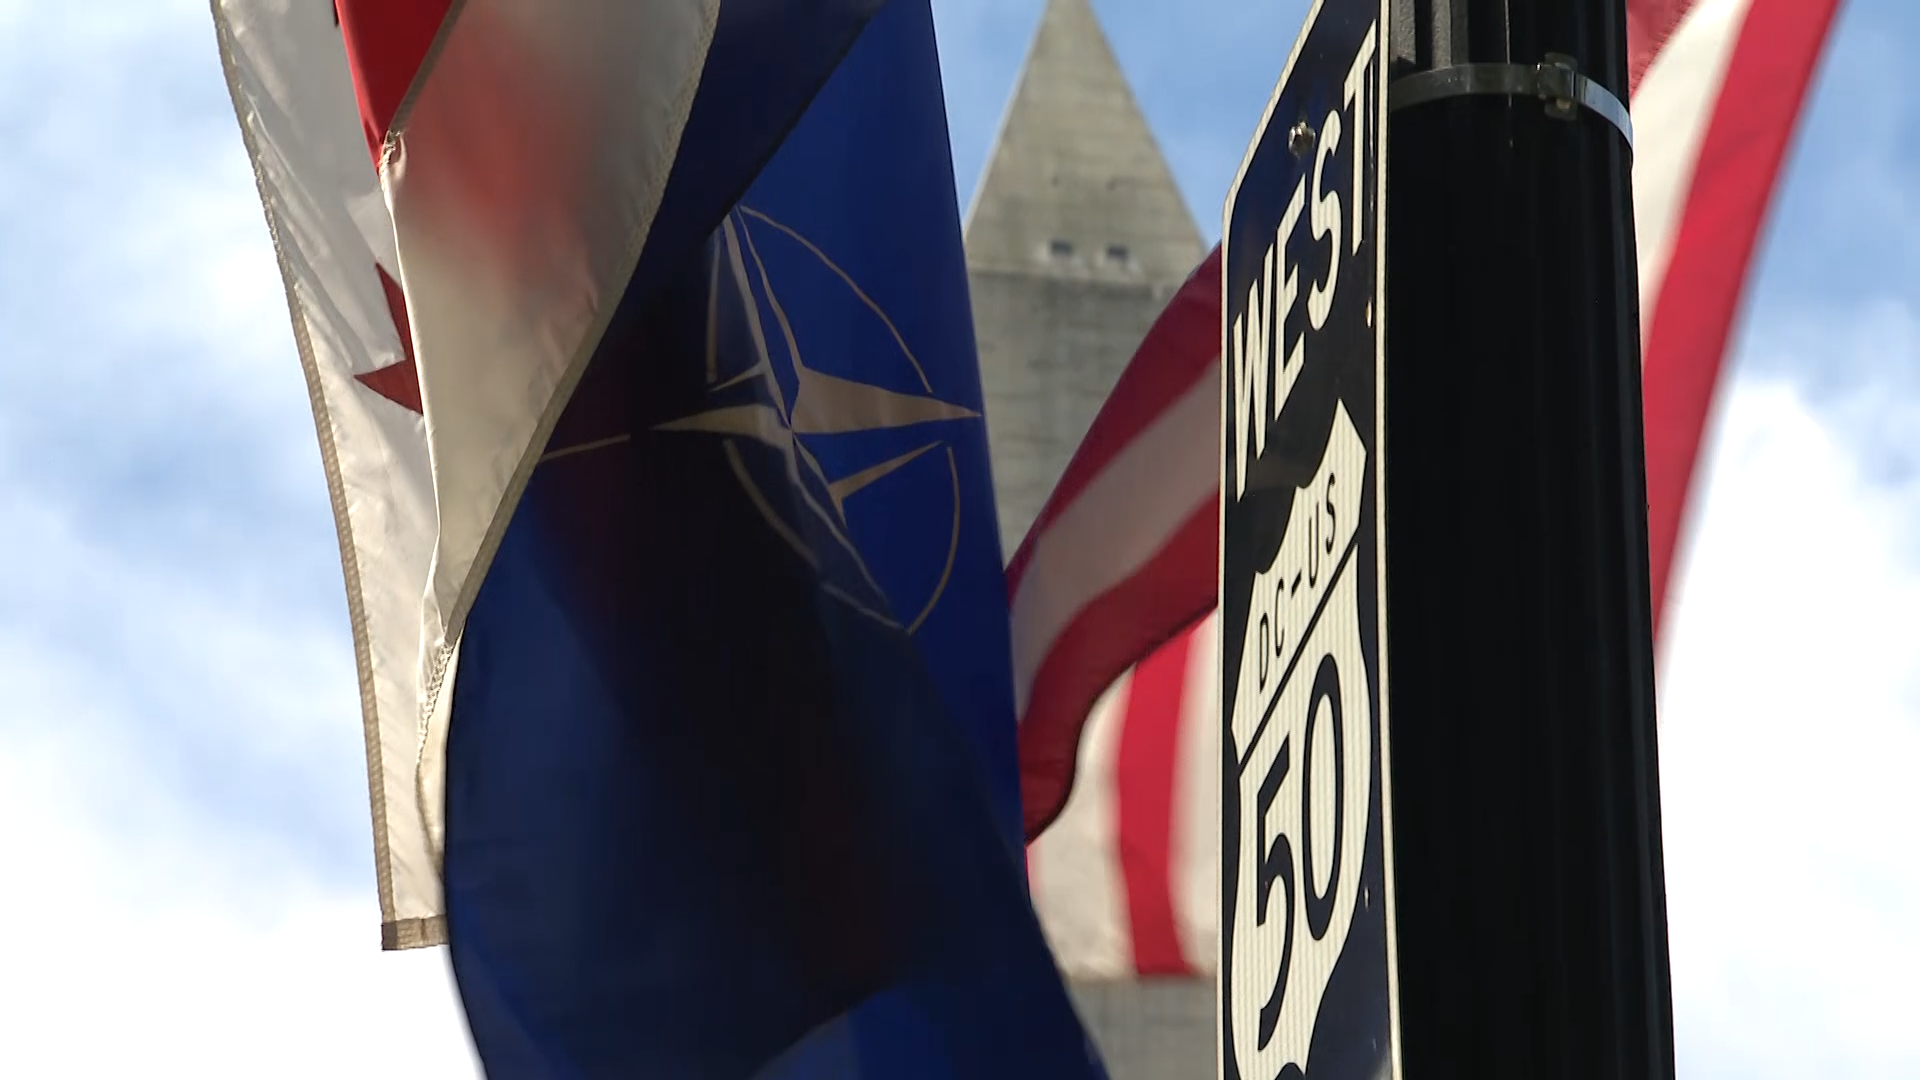 An Inside Look at the NATO Summit in Washington